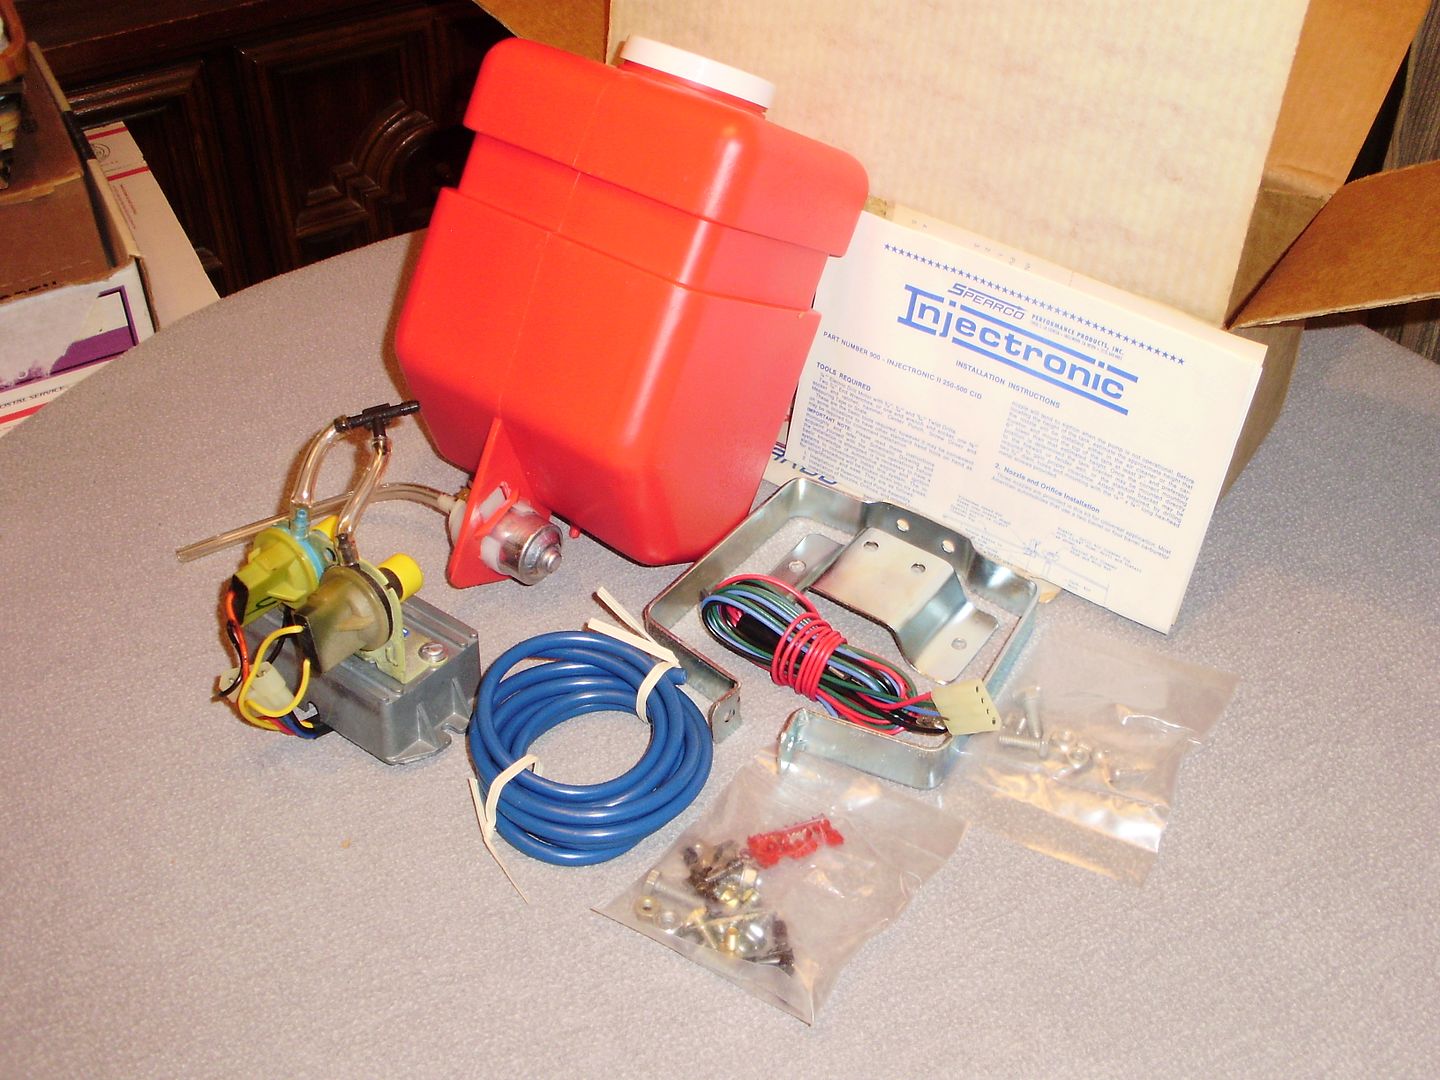  photo NOS SPEARCO INJECTRONIC WATER INJECTION SYSTEM PART 900 025_zpsfbbzcbjj.jpg